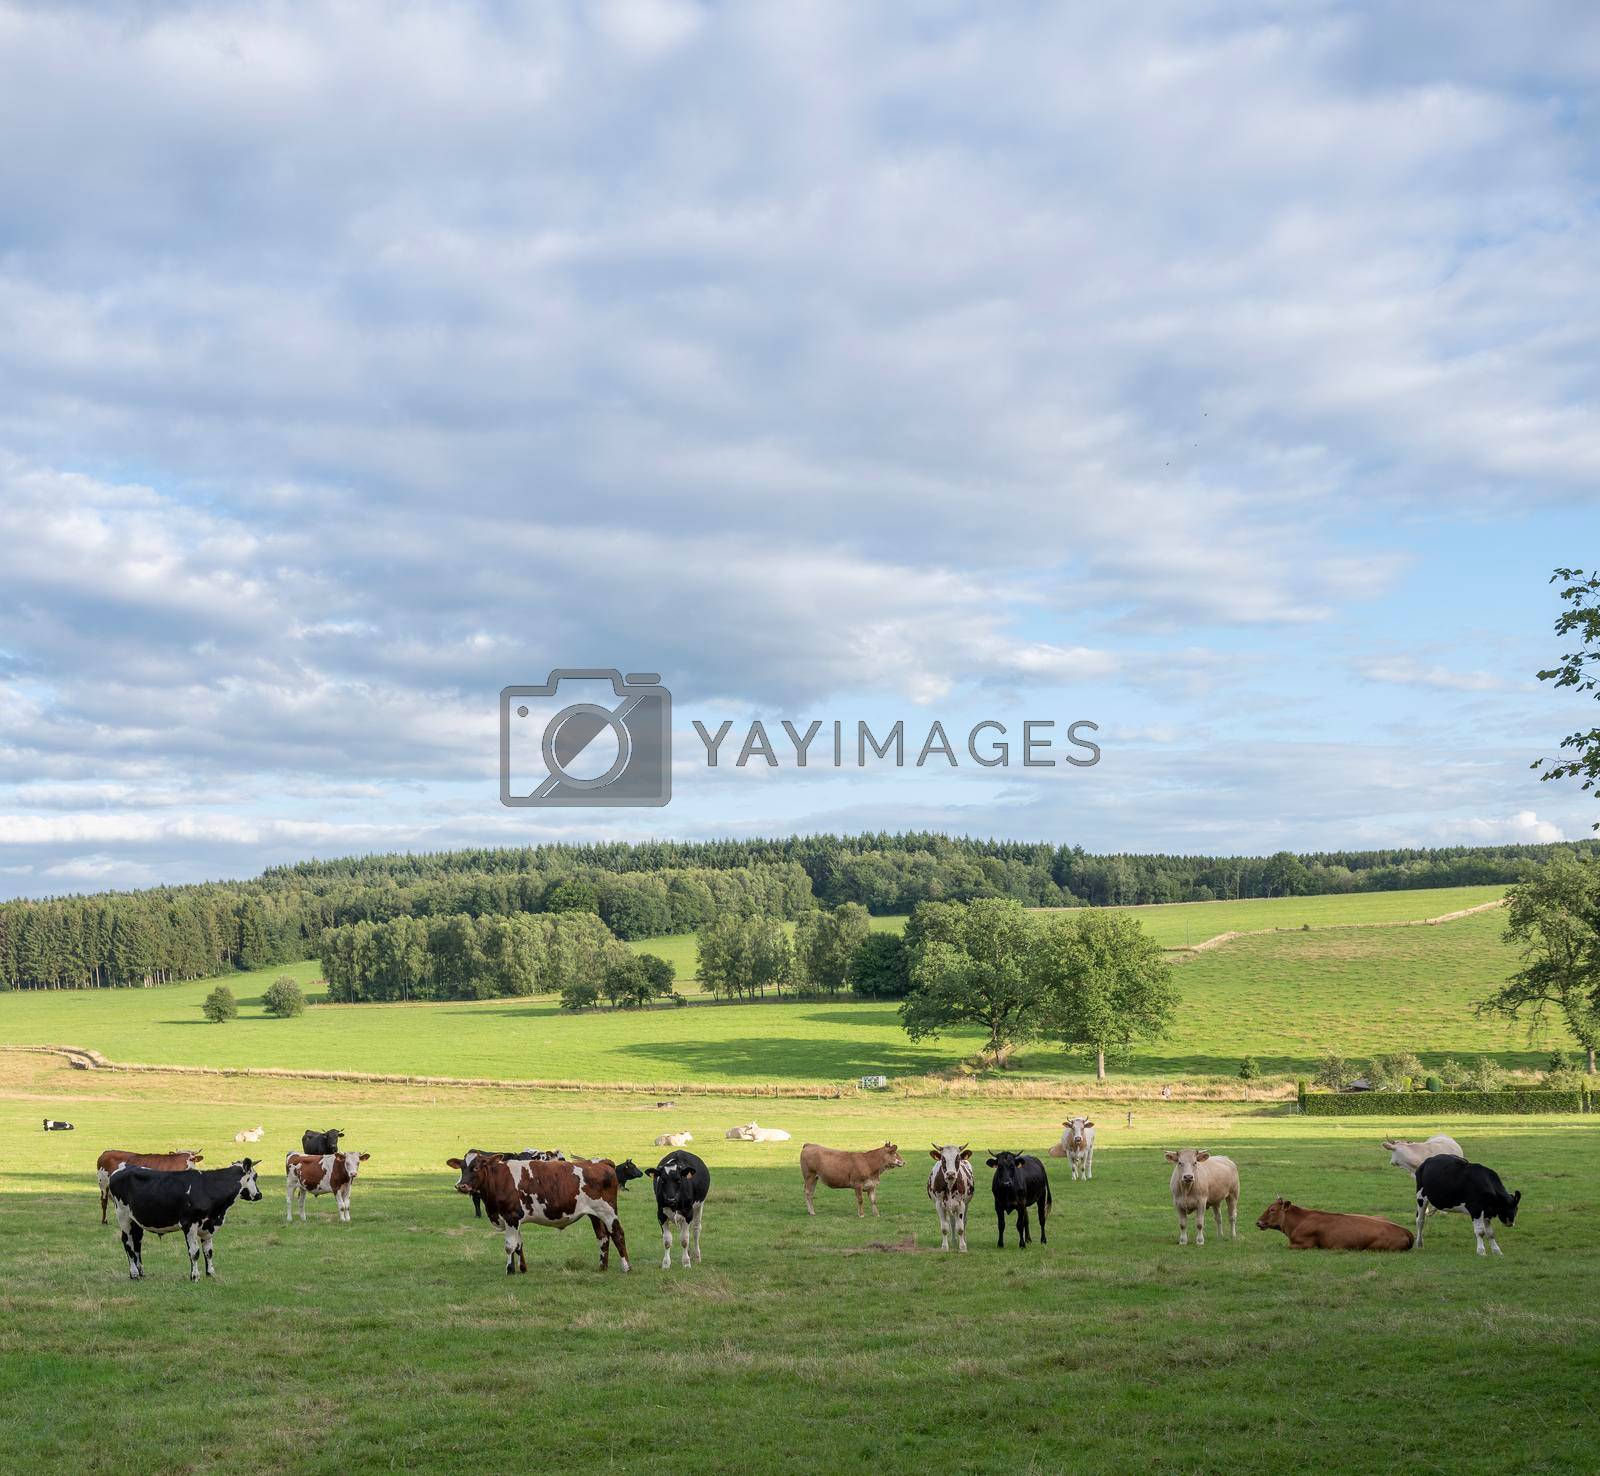 blue sky with clouds and cows in variations of white, black, brown and red in green grassy park landscape of northern france near charleville